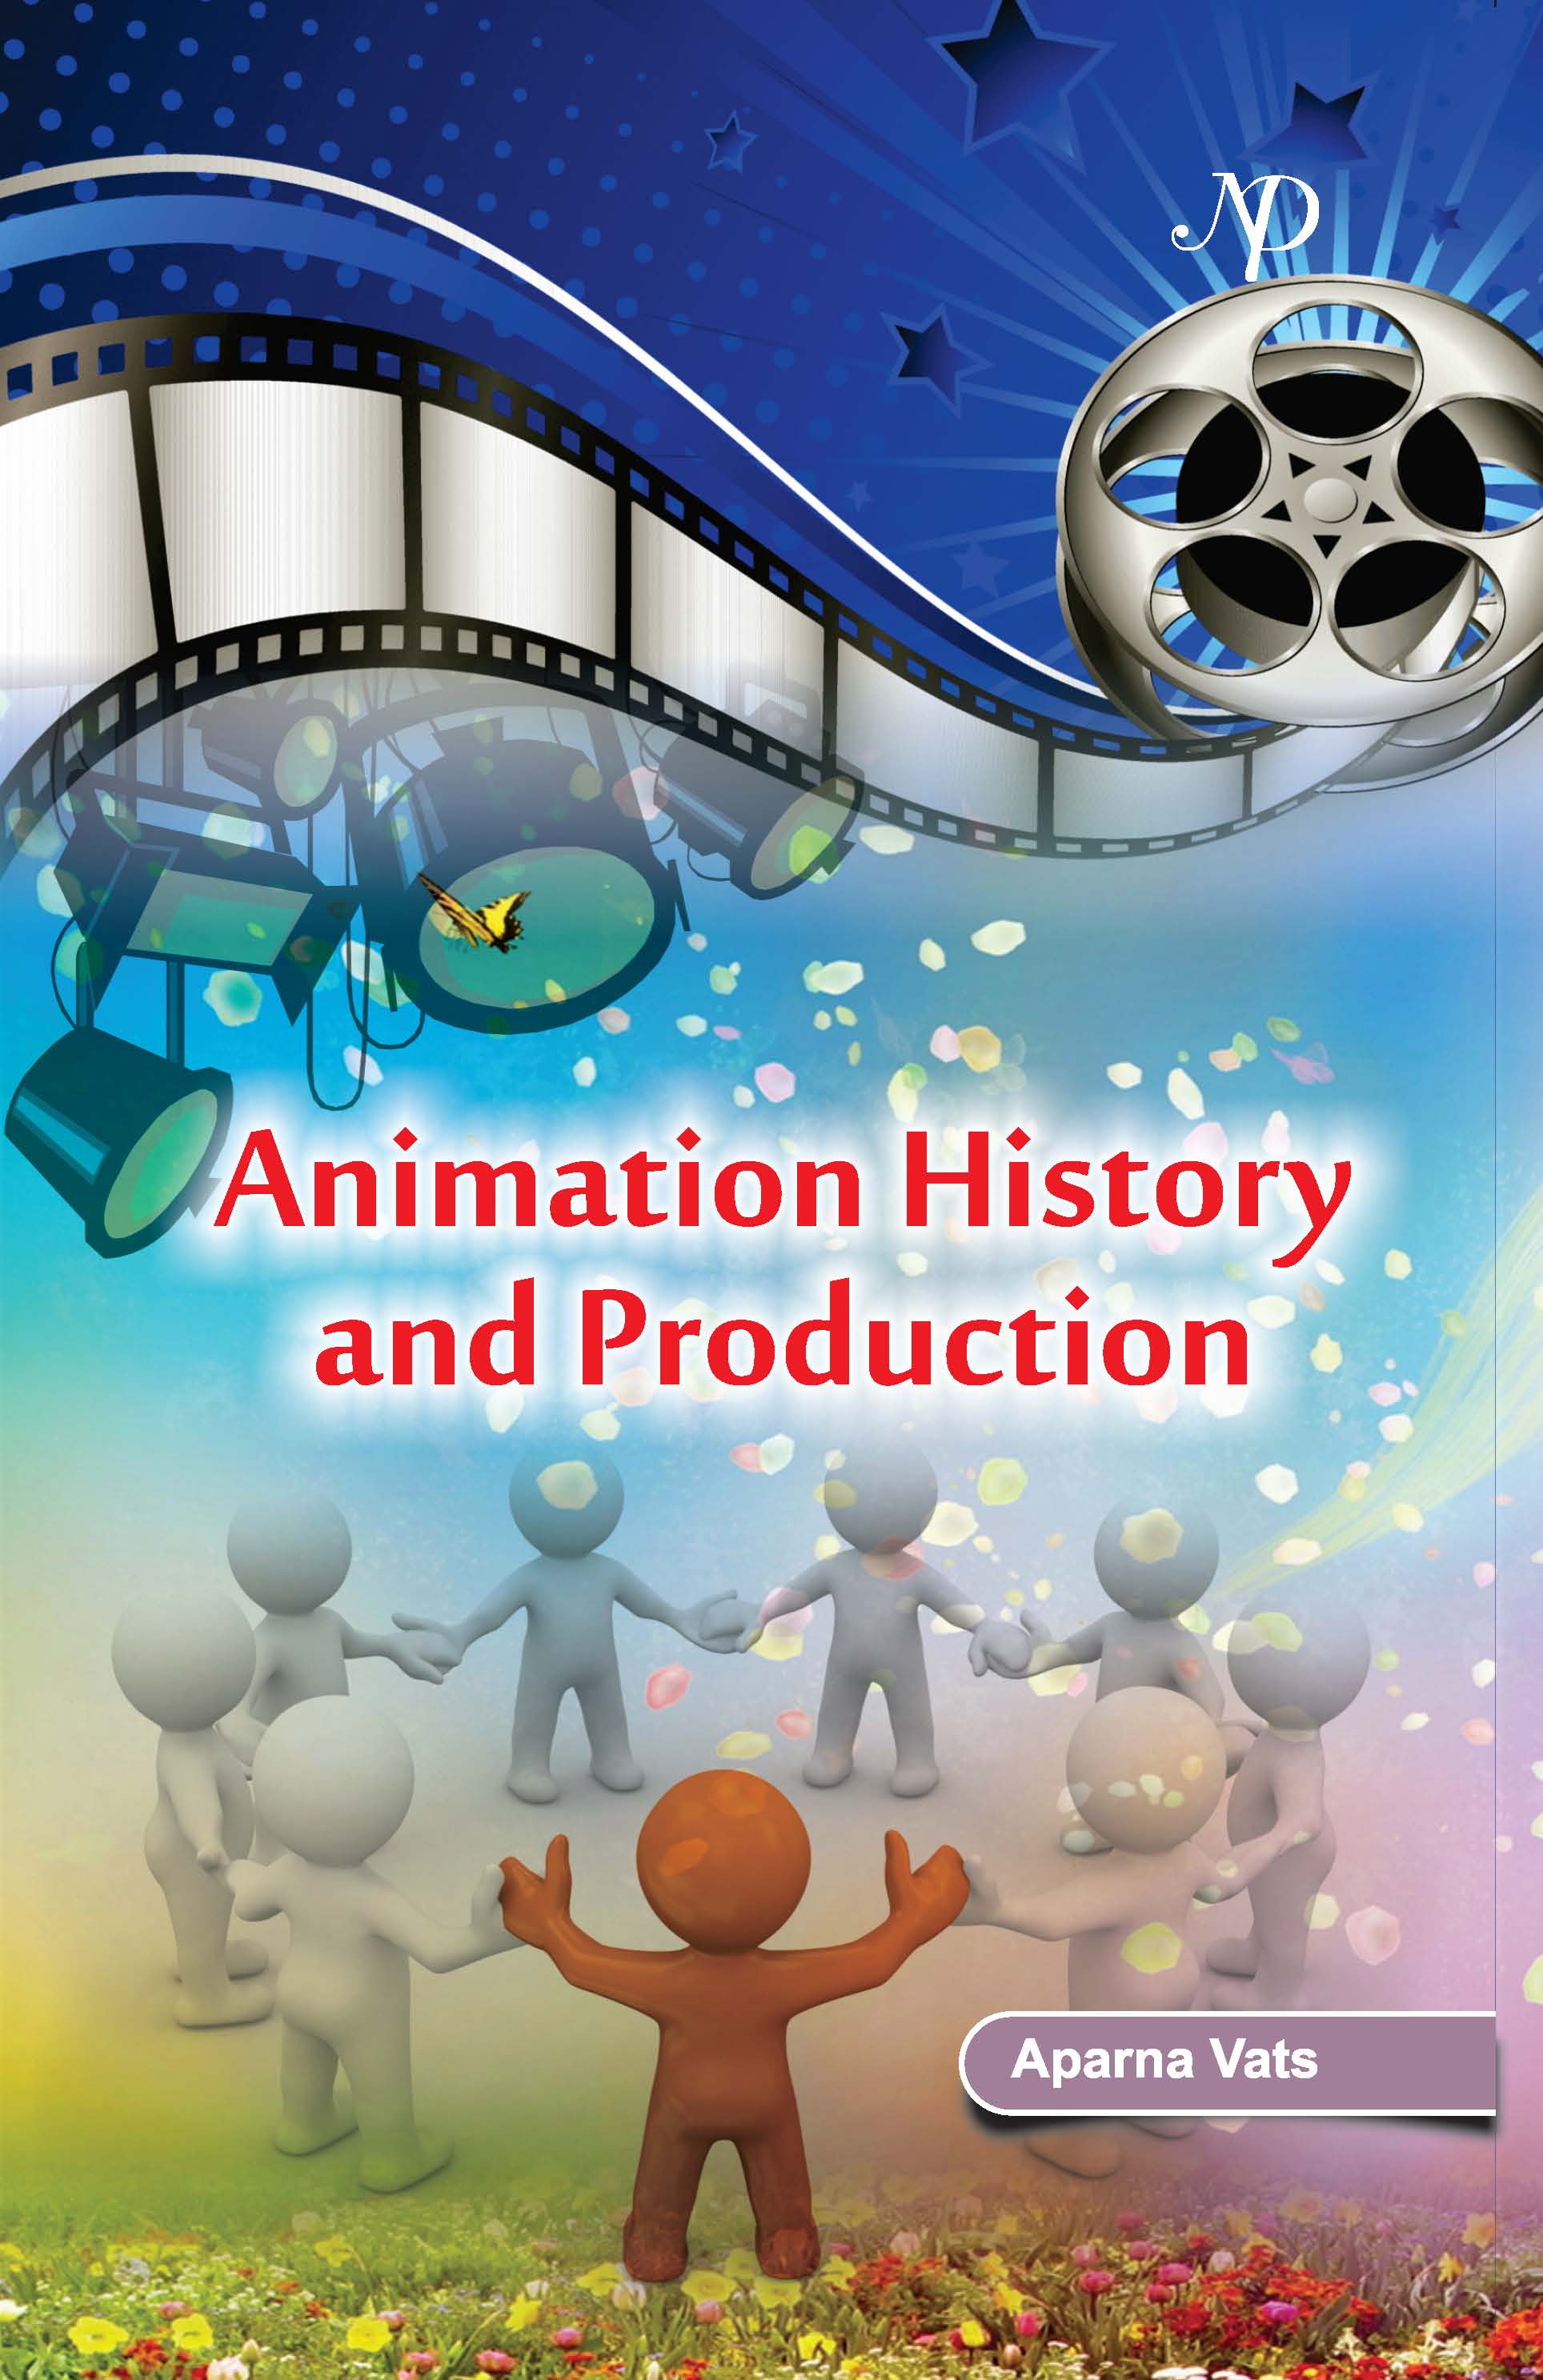 ANIMATION history and production.jpg